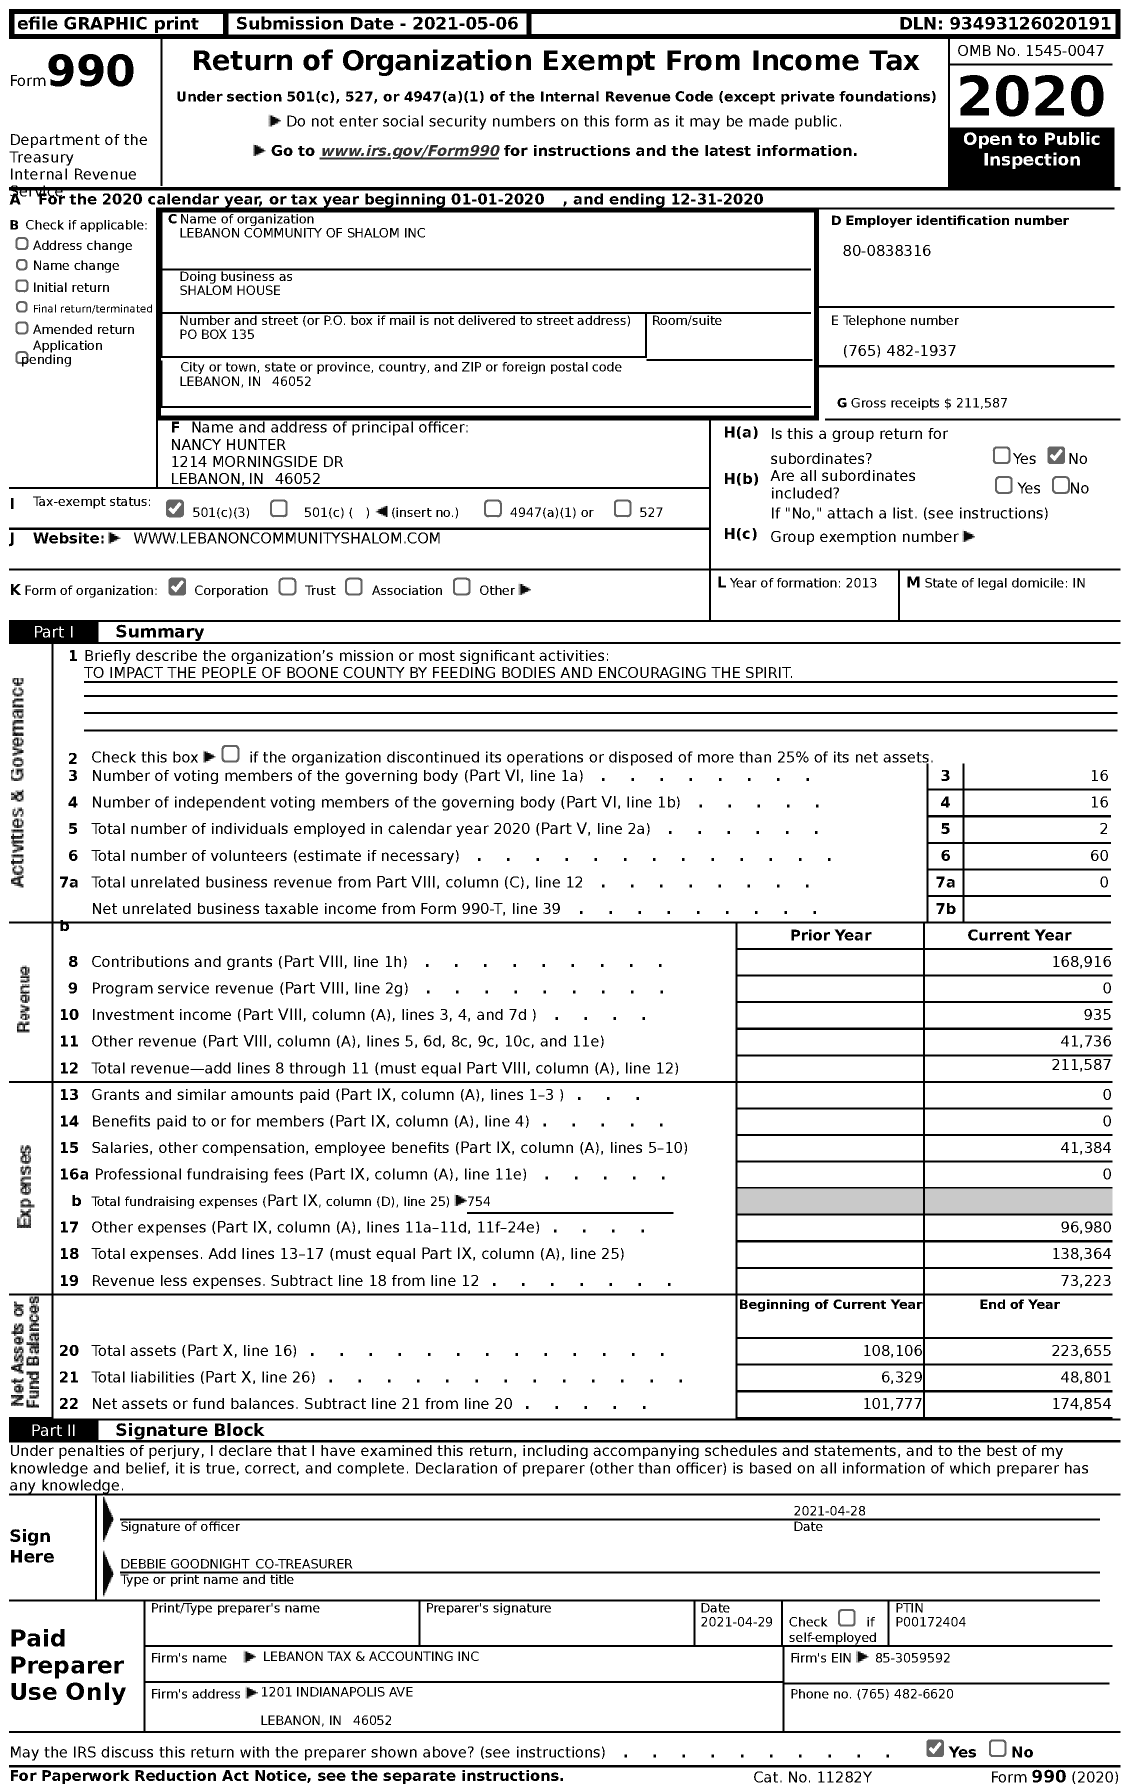 Image of first page of 2020 Form 990 for Shalom House / Lebanon Community of Shalom Inc